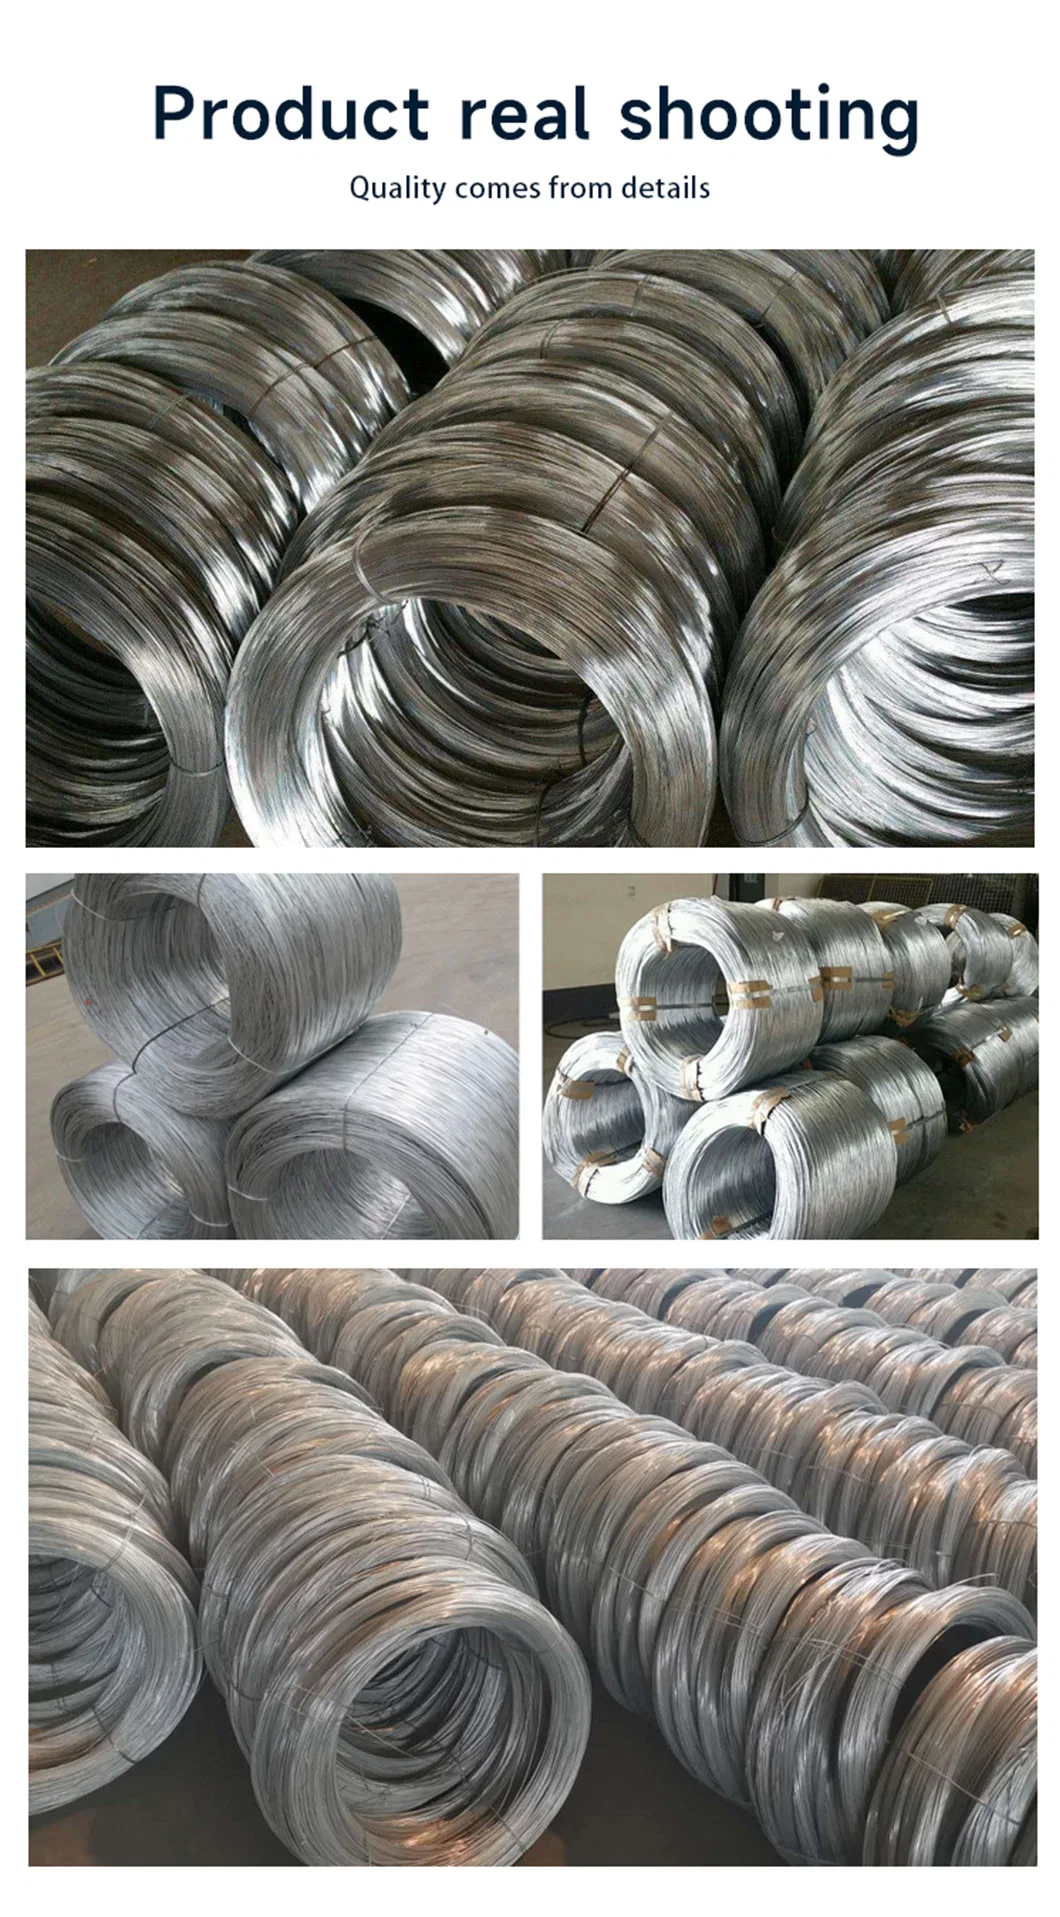 1.0mm 2.5mm Galvanized Steel Spring Wire or for Fishing Net